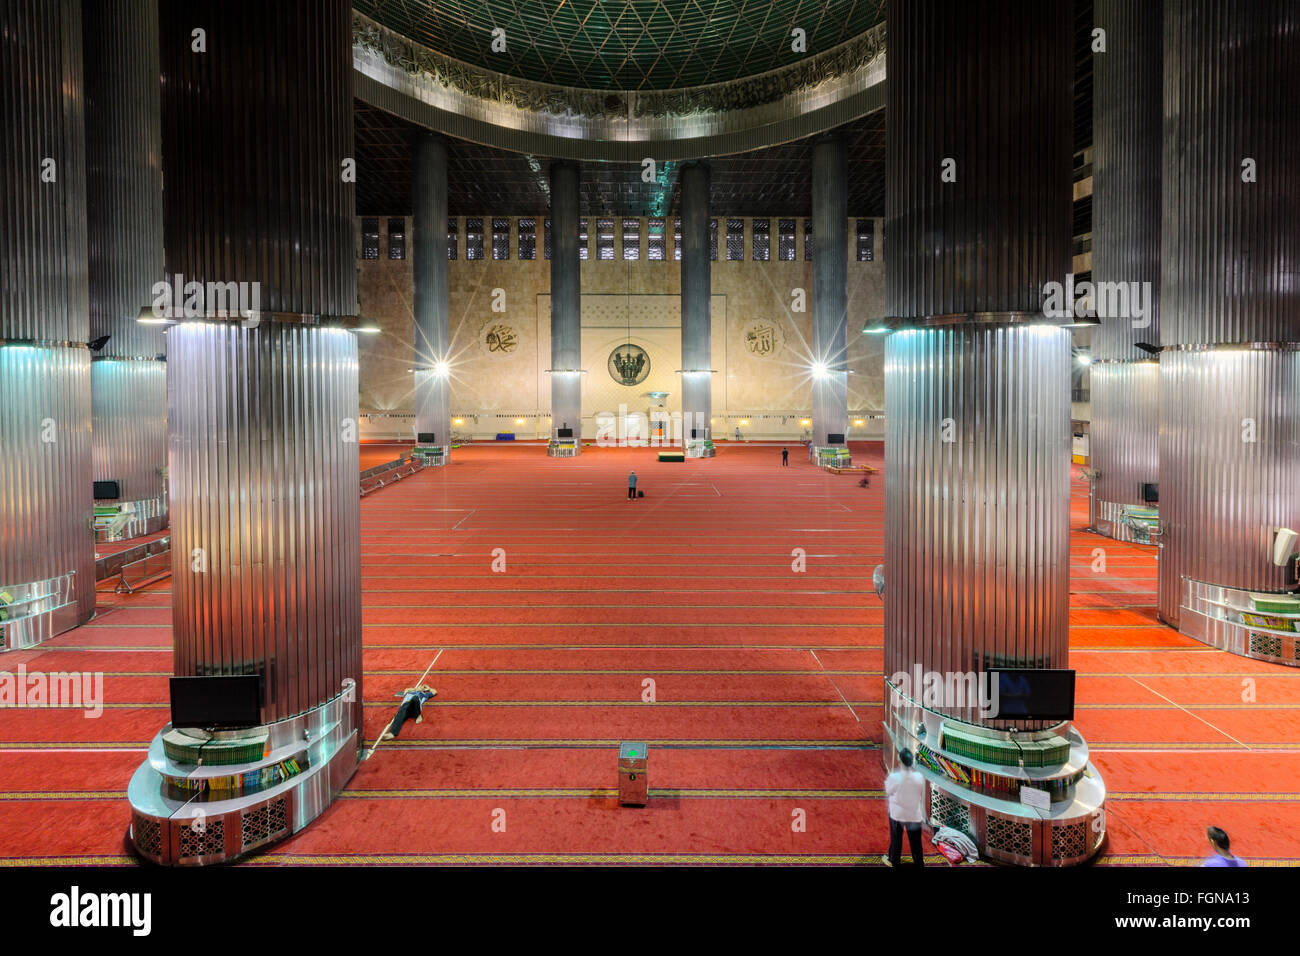 Interior of the prayer hall of the Istiqlal Mosque, or Masjid Istiqlal, in Jakarta - the largest mosque in Southeast Asia Stock Photo